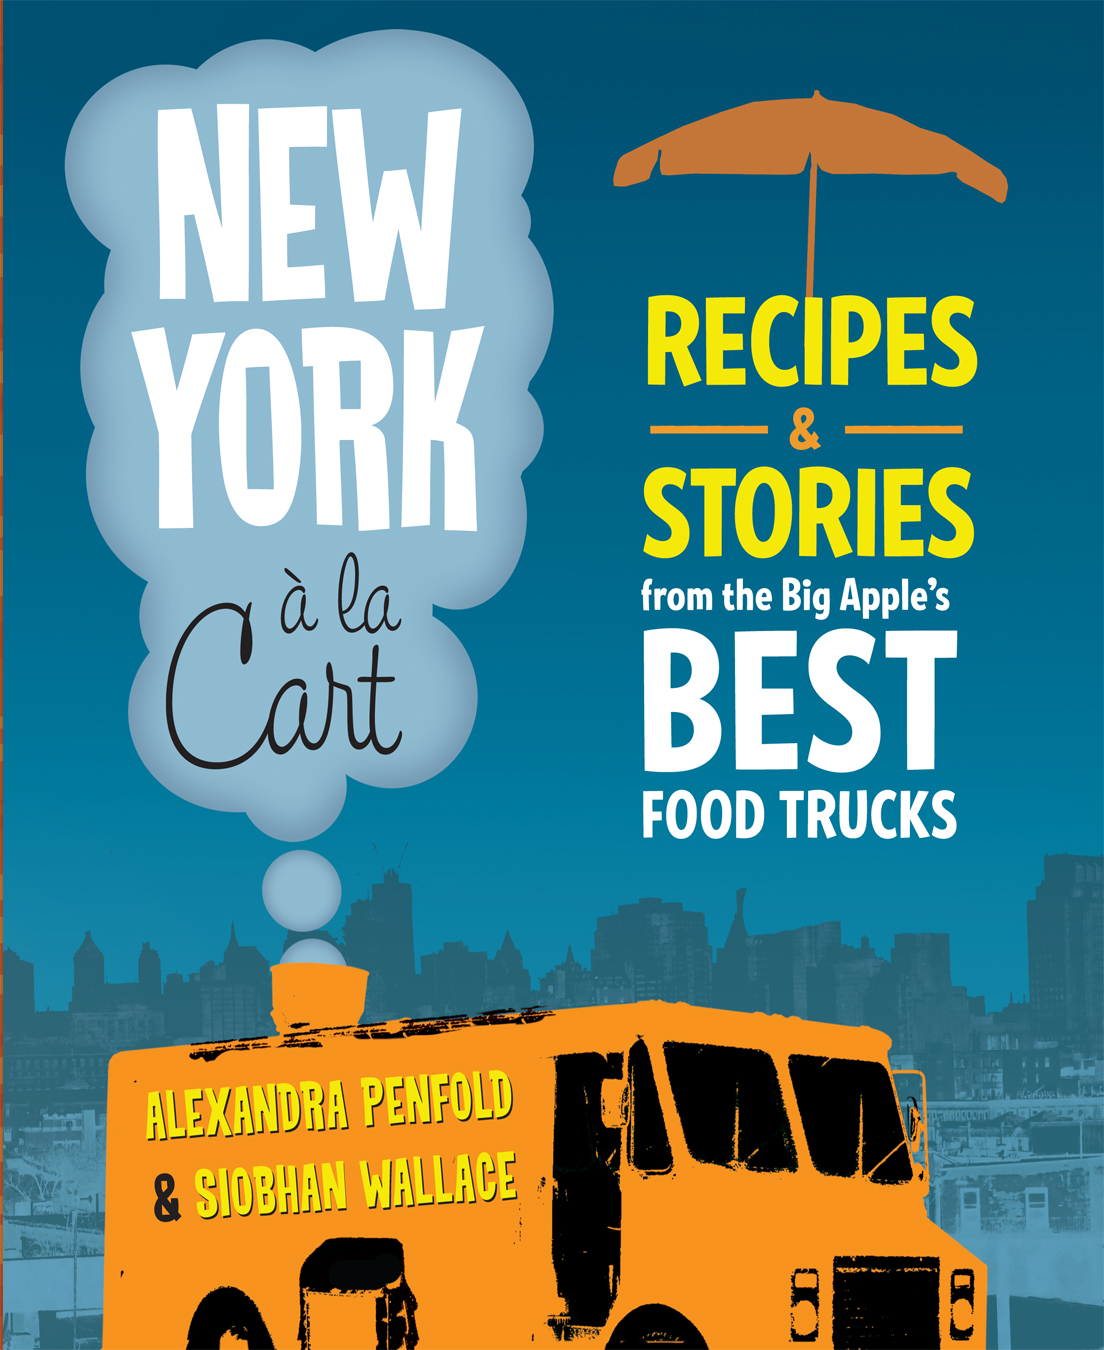 Book Launch: New York a la Cart by Alexandra Penfold & Siobhan Wallace